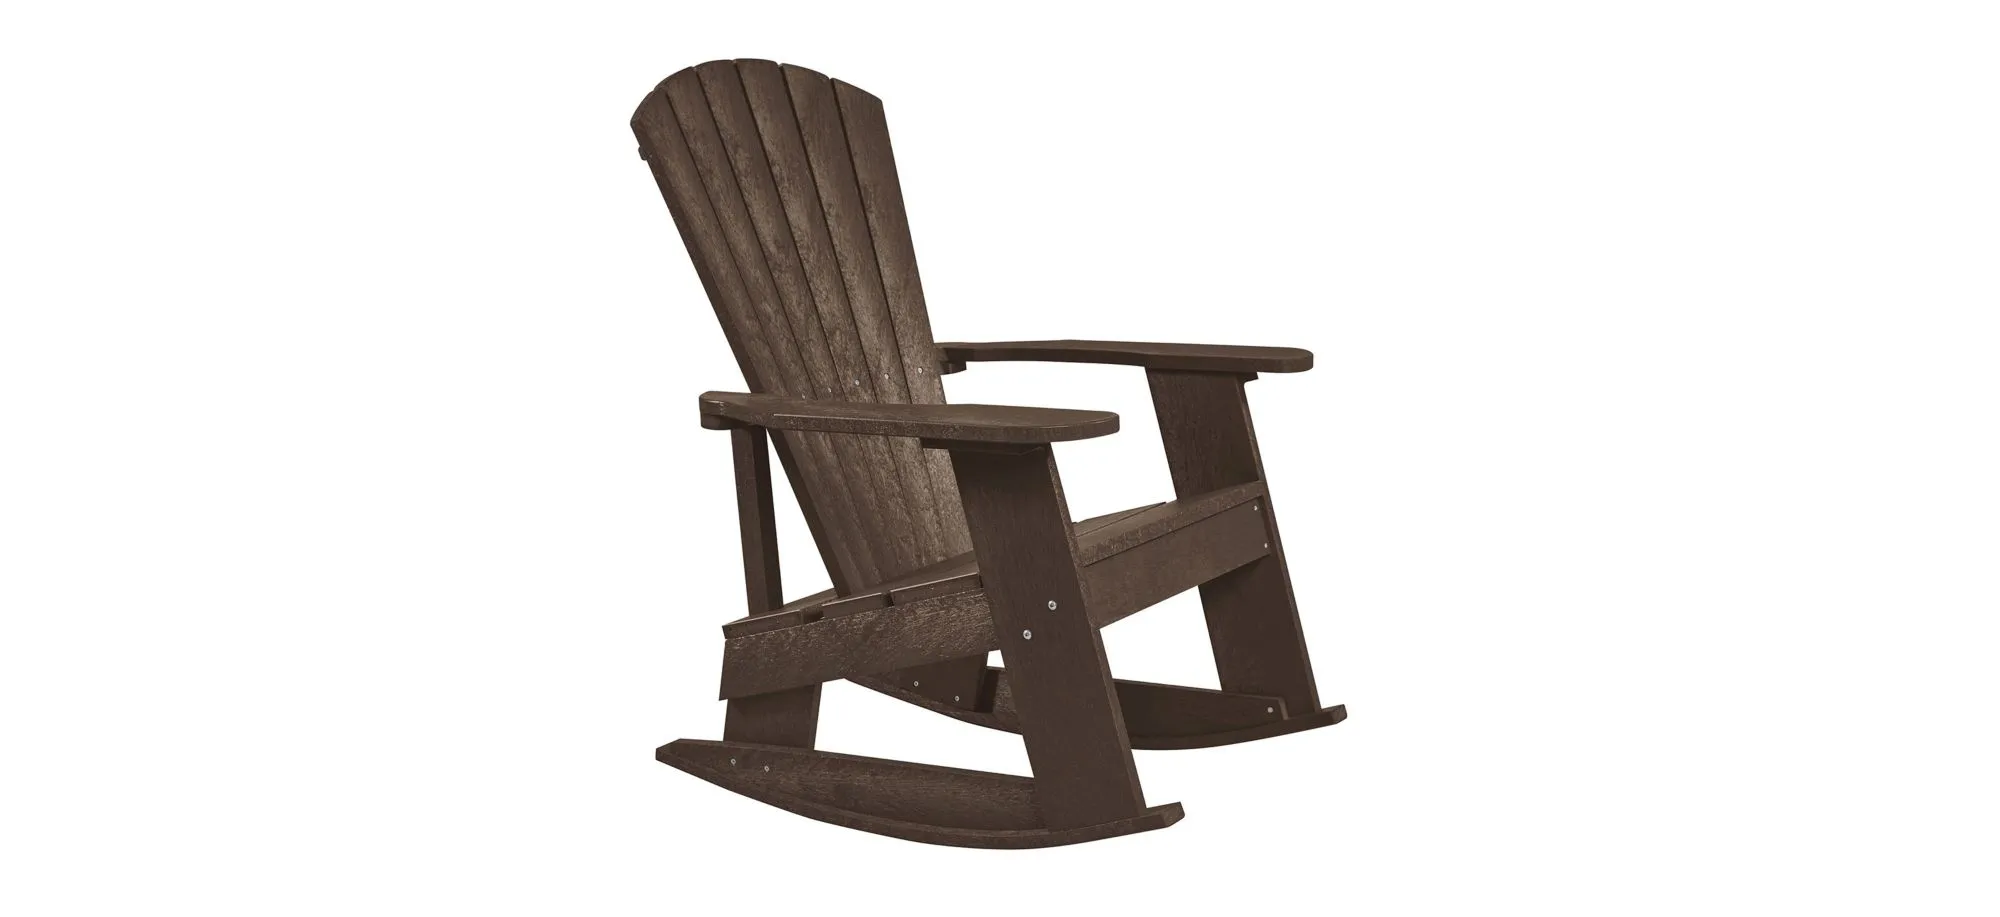 Capterra Casual Recycled Outdoor Adirondack Rocker in Terra by C.R. Plastic Products